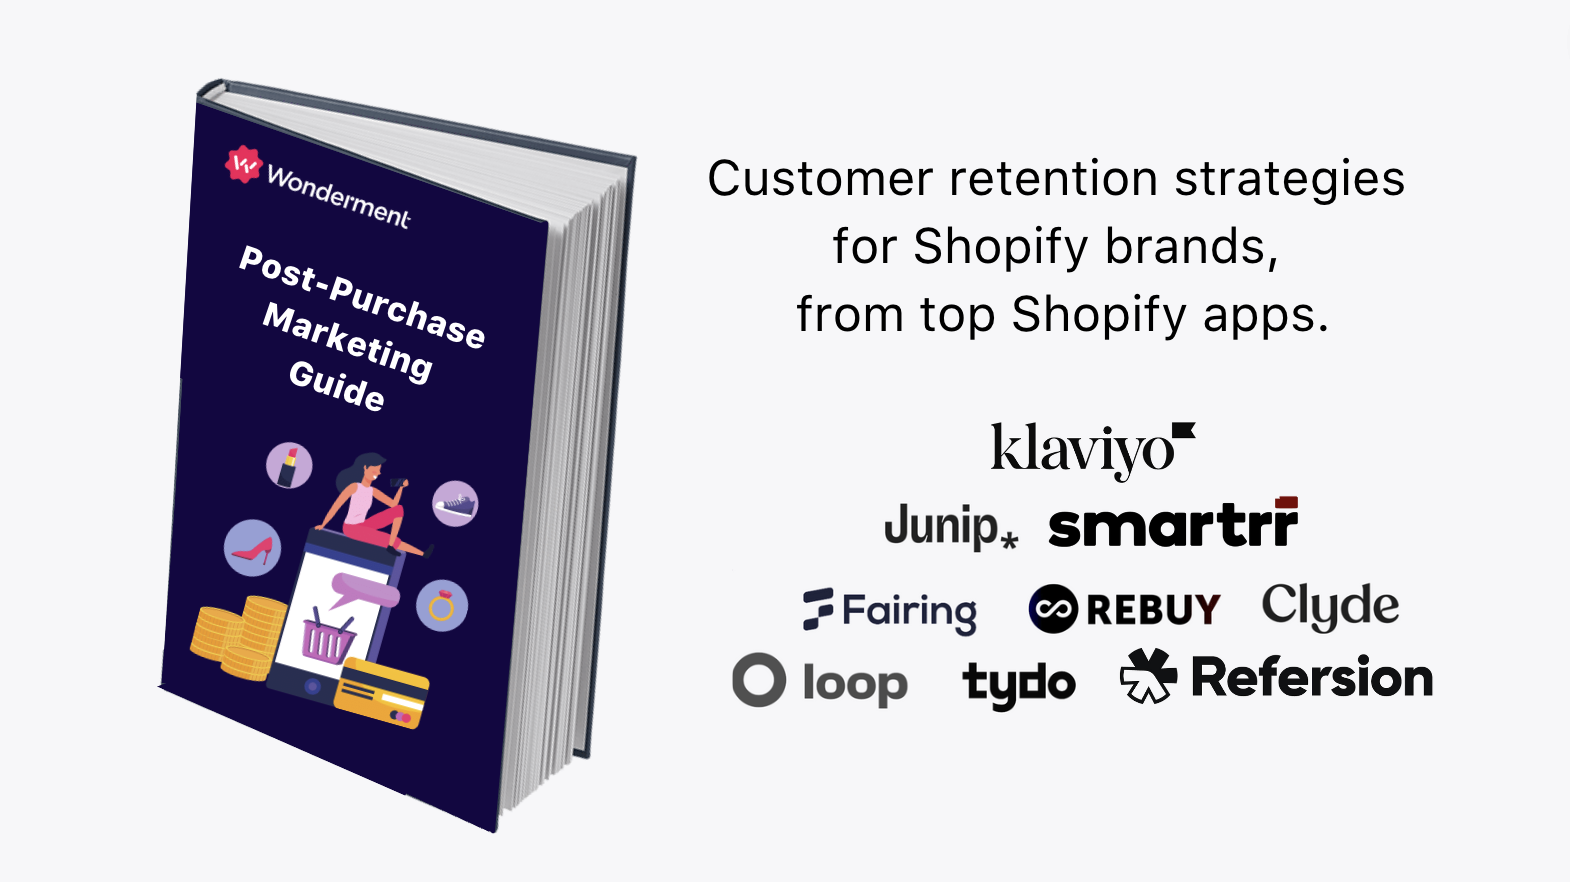 Post Purchase Marketing Guide: Customer Retention Strategies for Shopify Brands